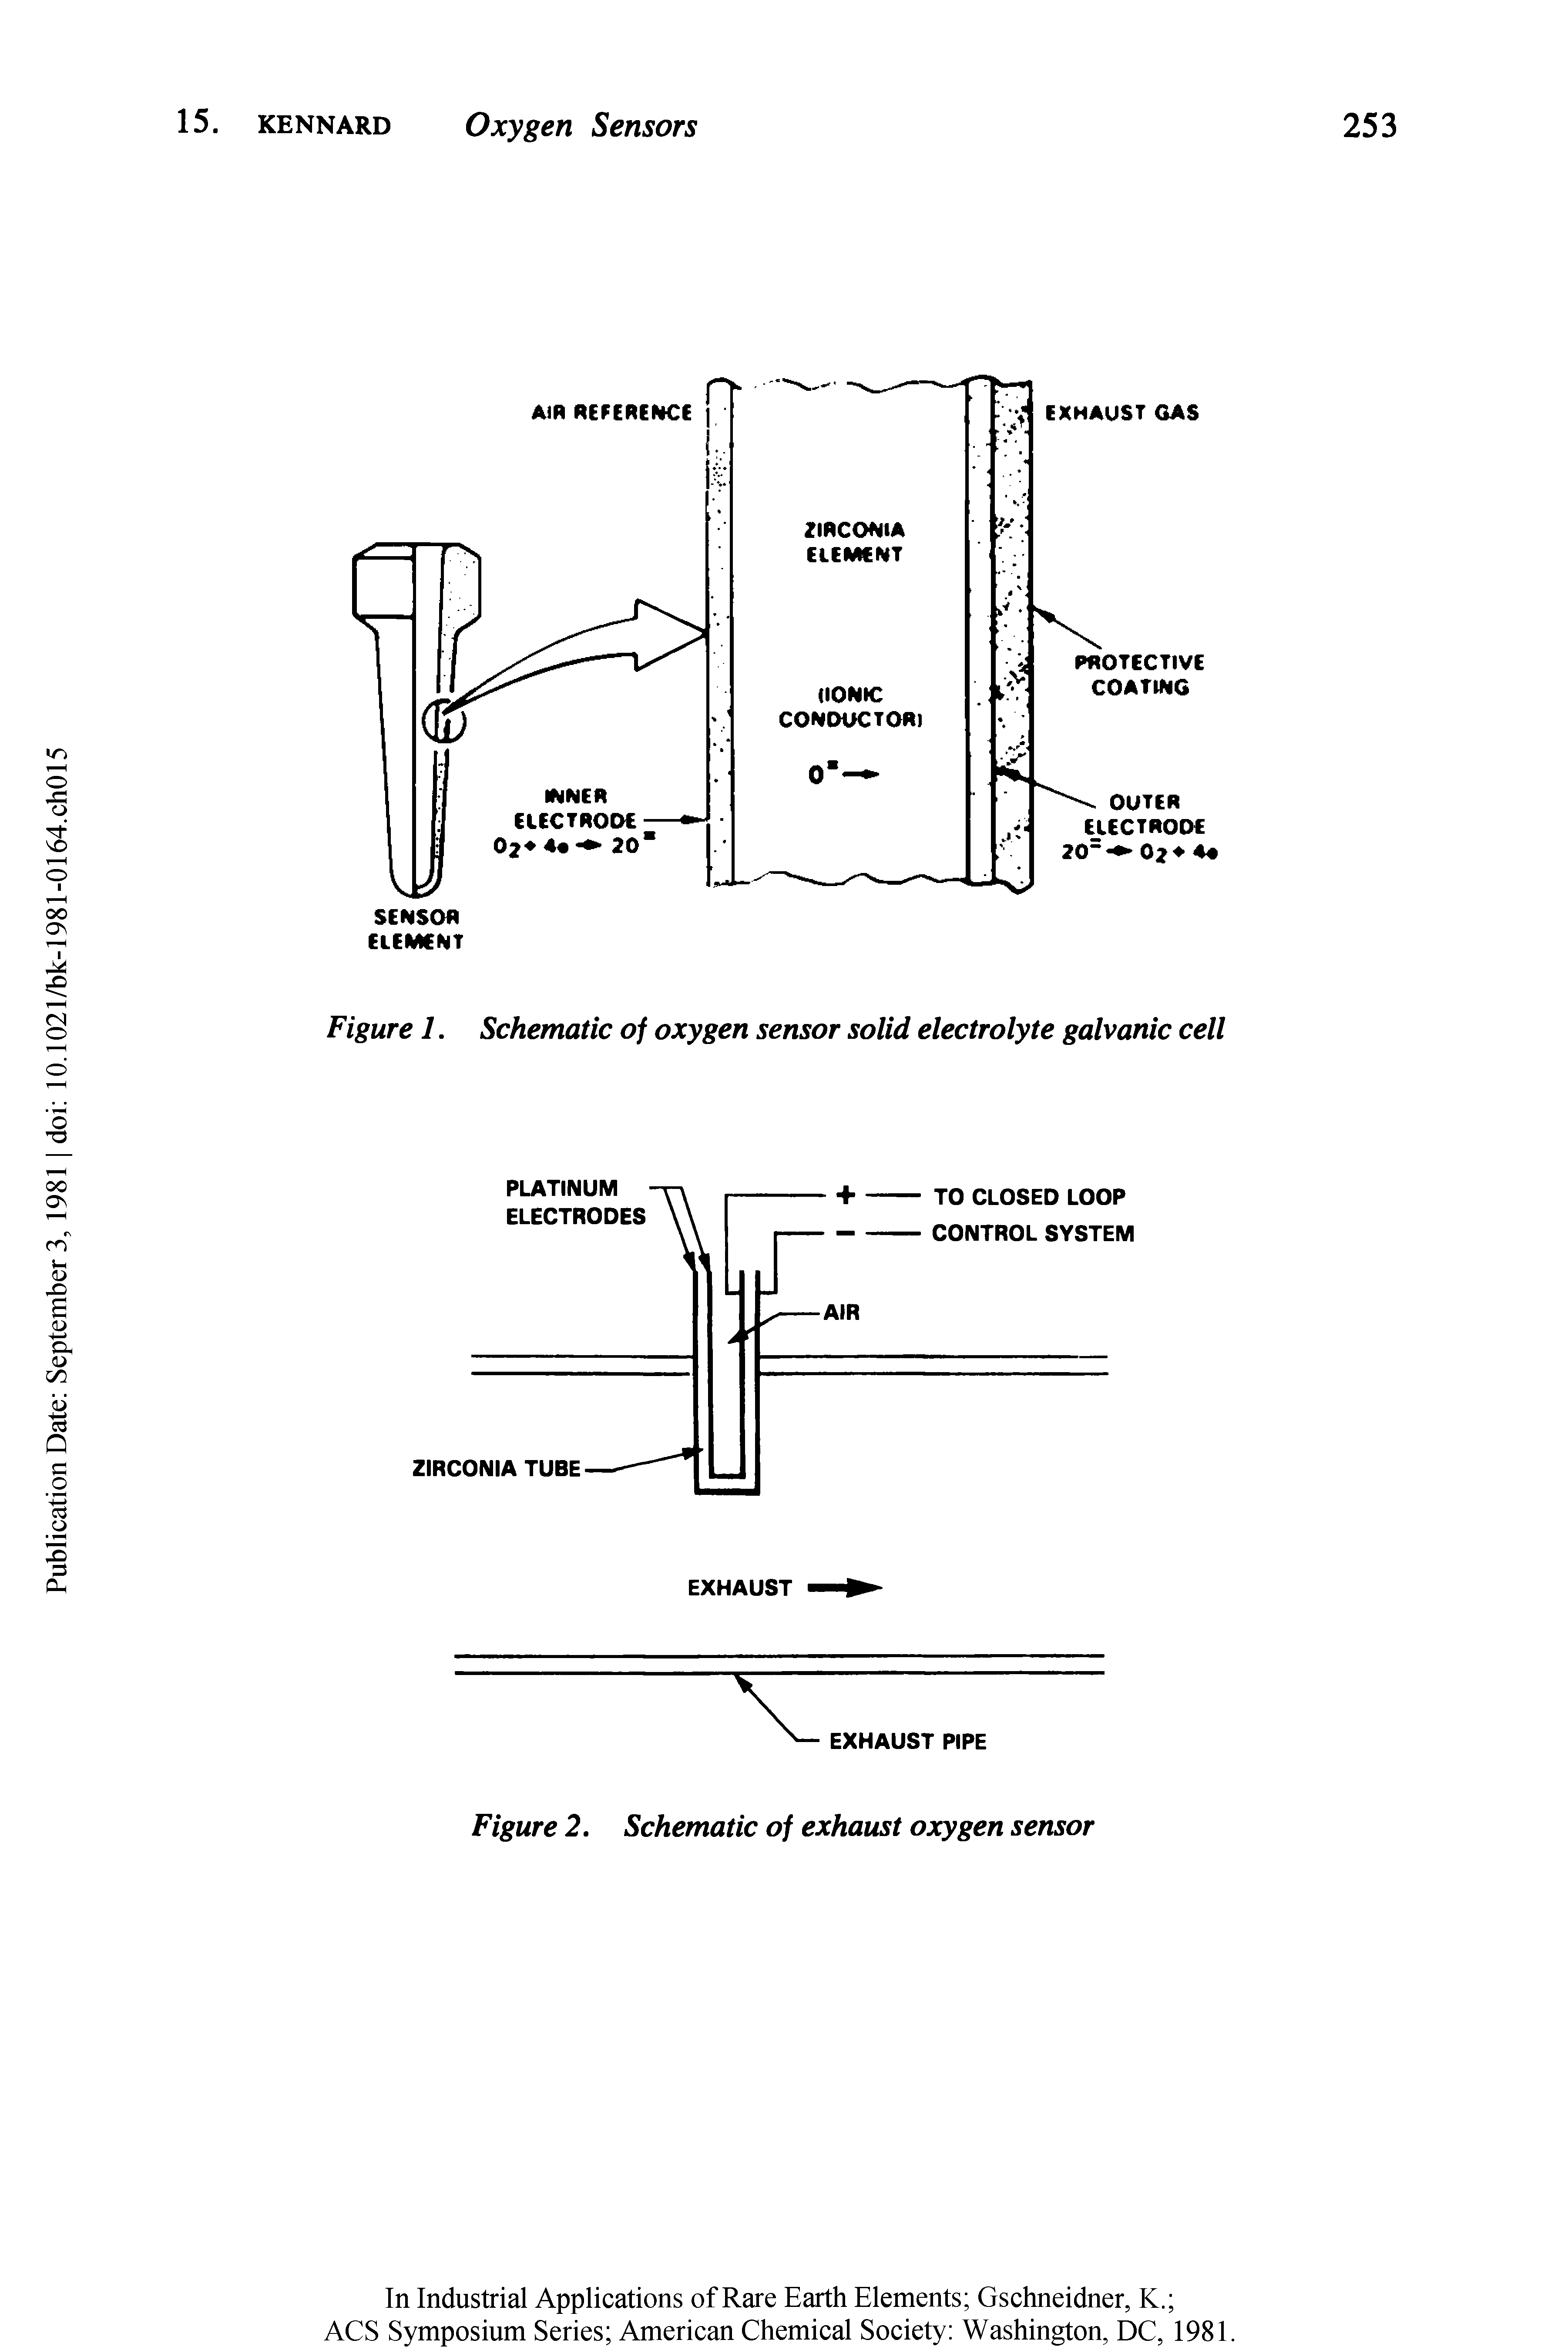 Figure 1. Schematic of oxygen sensor solid electrolyte galvanic cell...